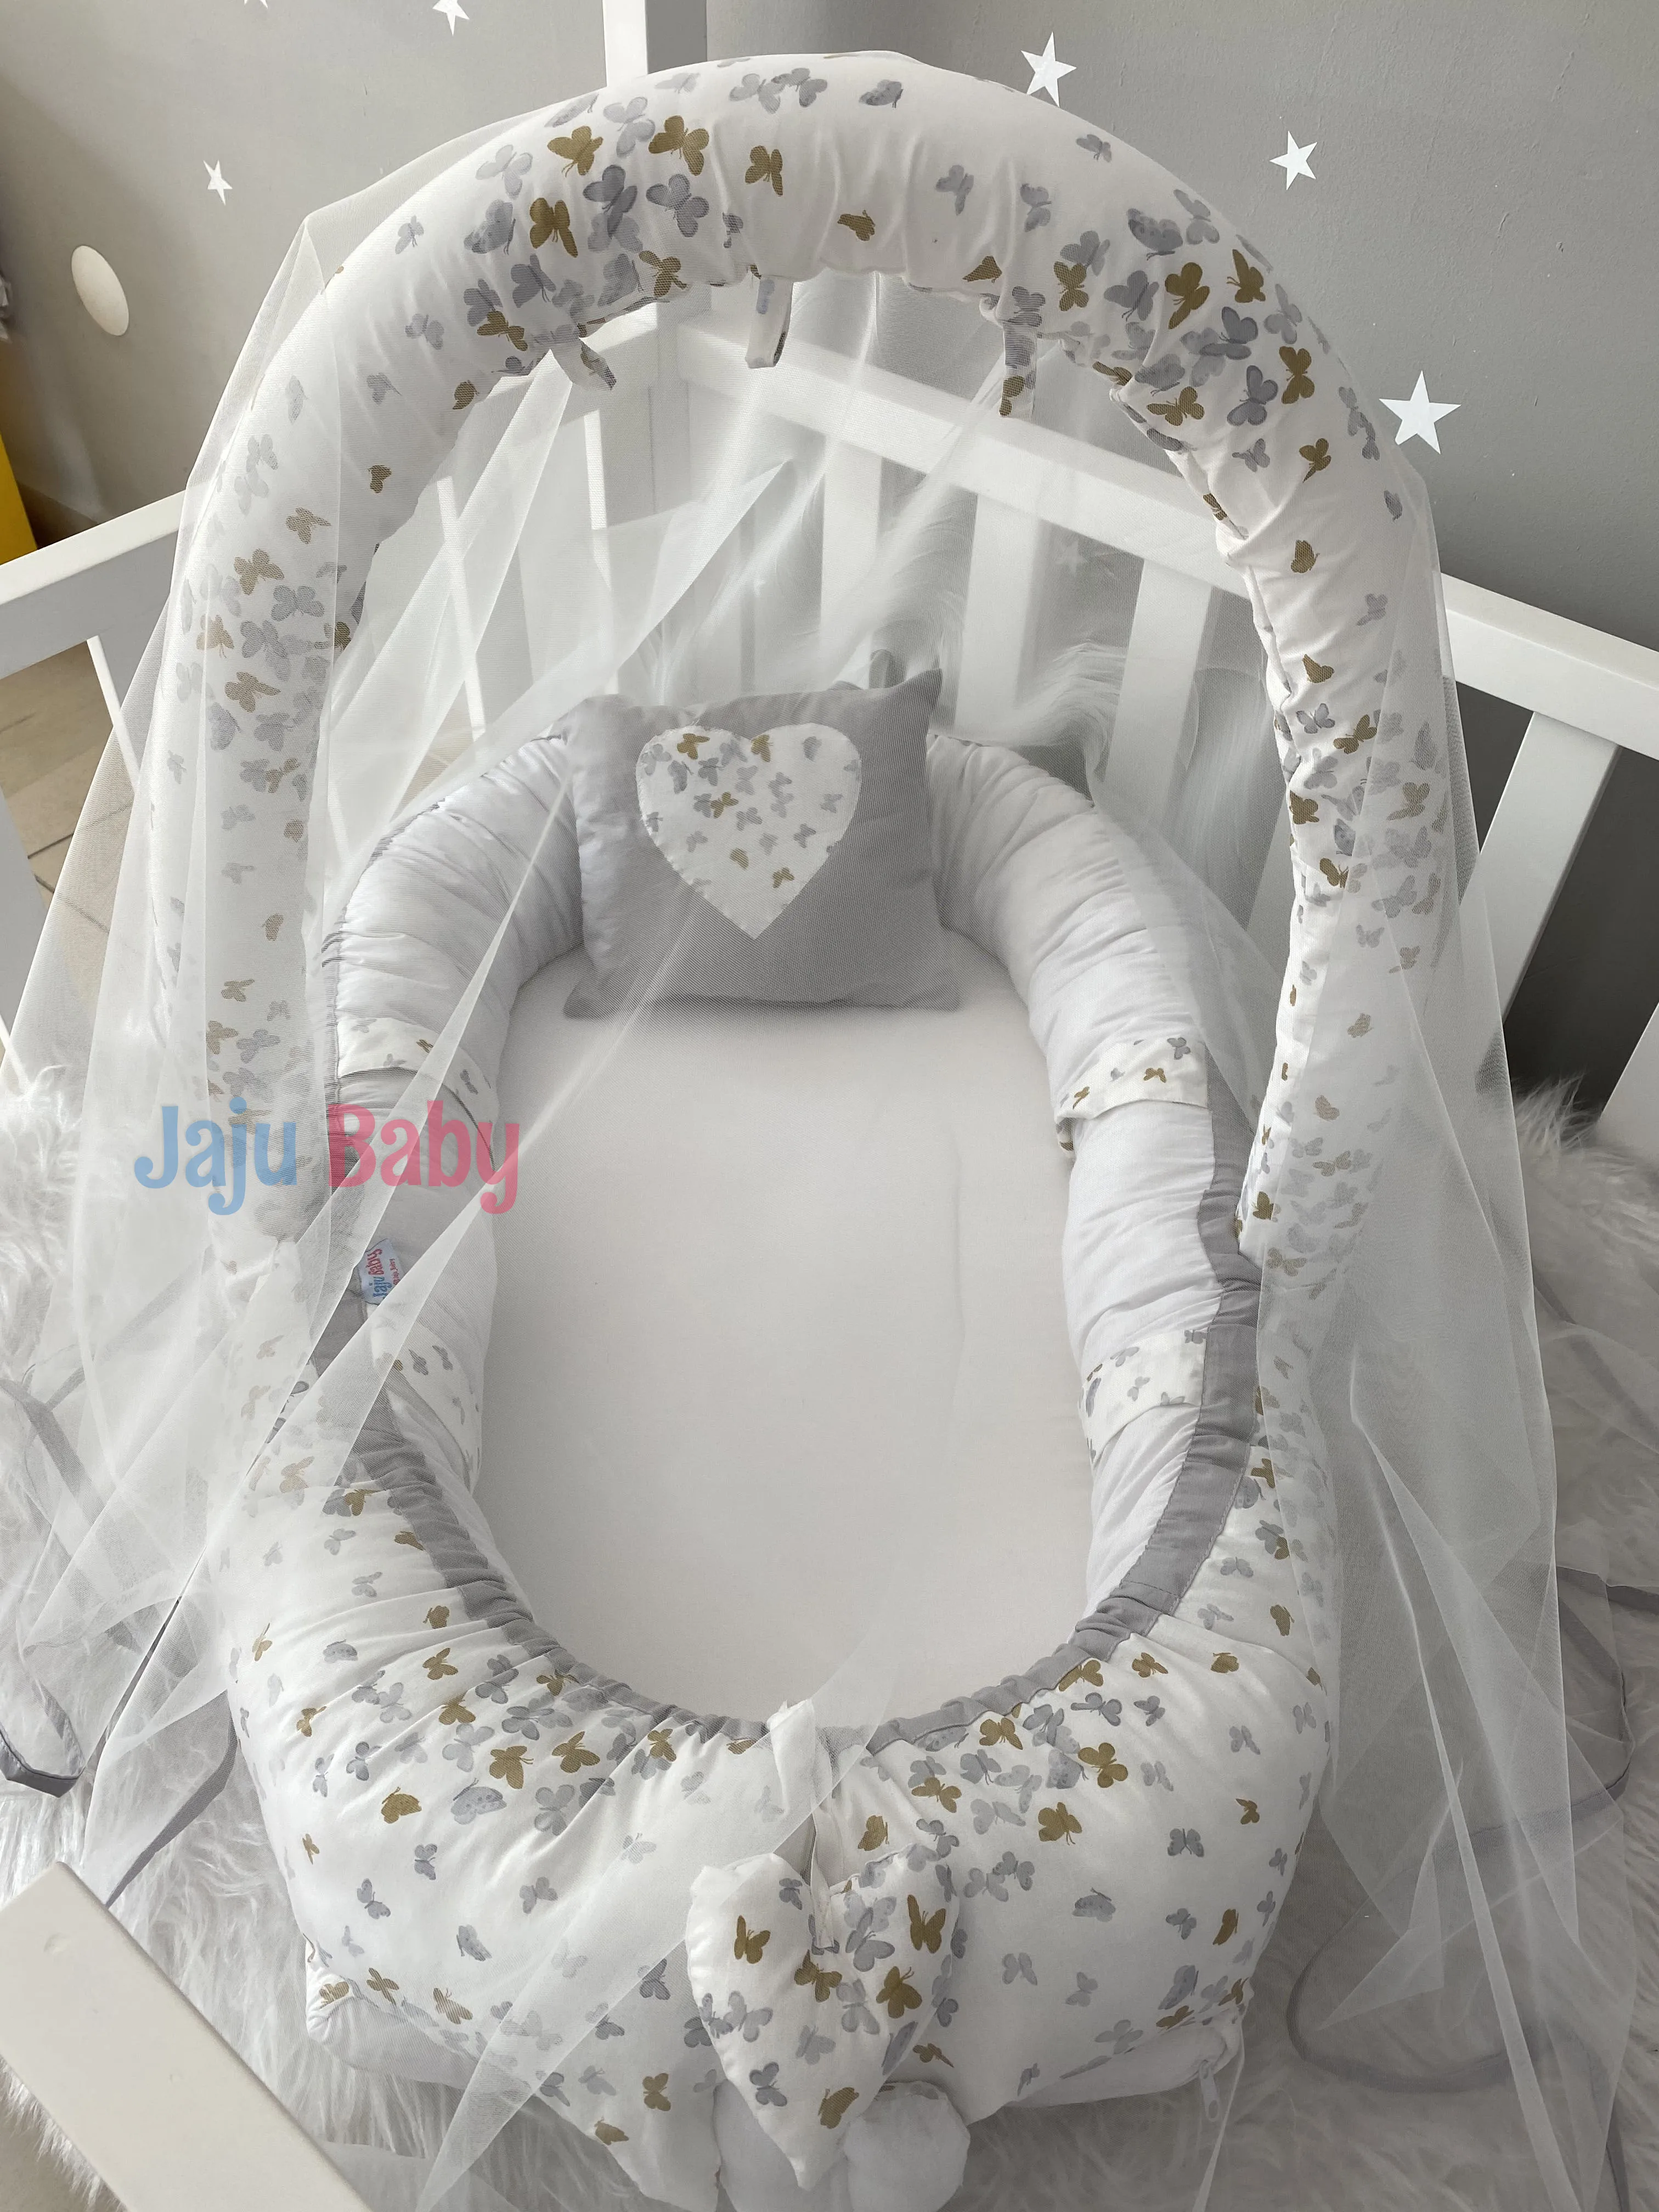 Jaju Baby Handmade Gray Butterfly Patterned Mosquito Net and Toy Apparatus Luxury Design Babynest Mother Side Portable Baby Bed